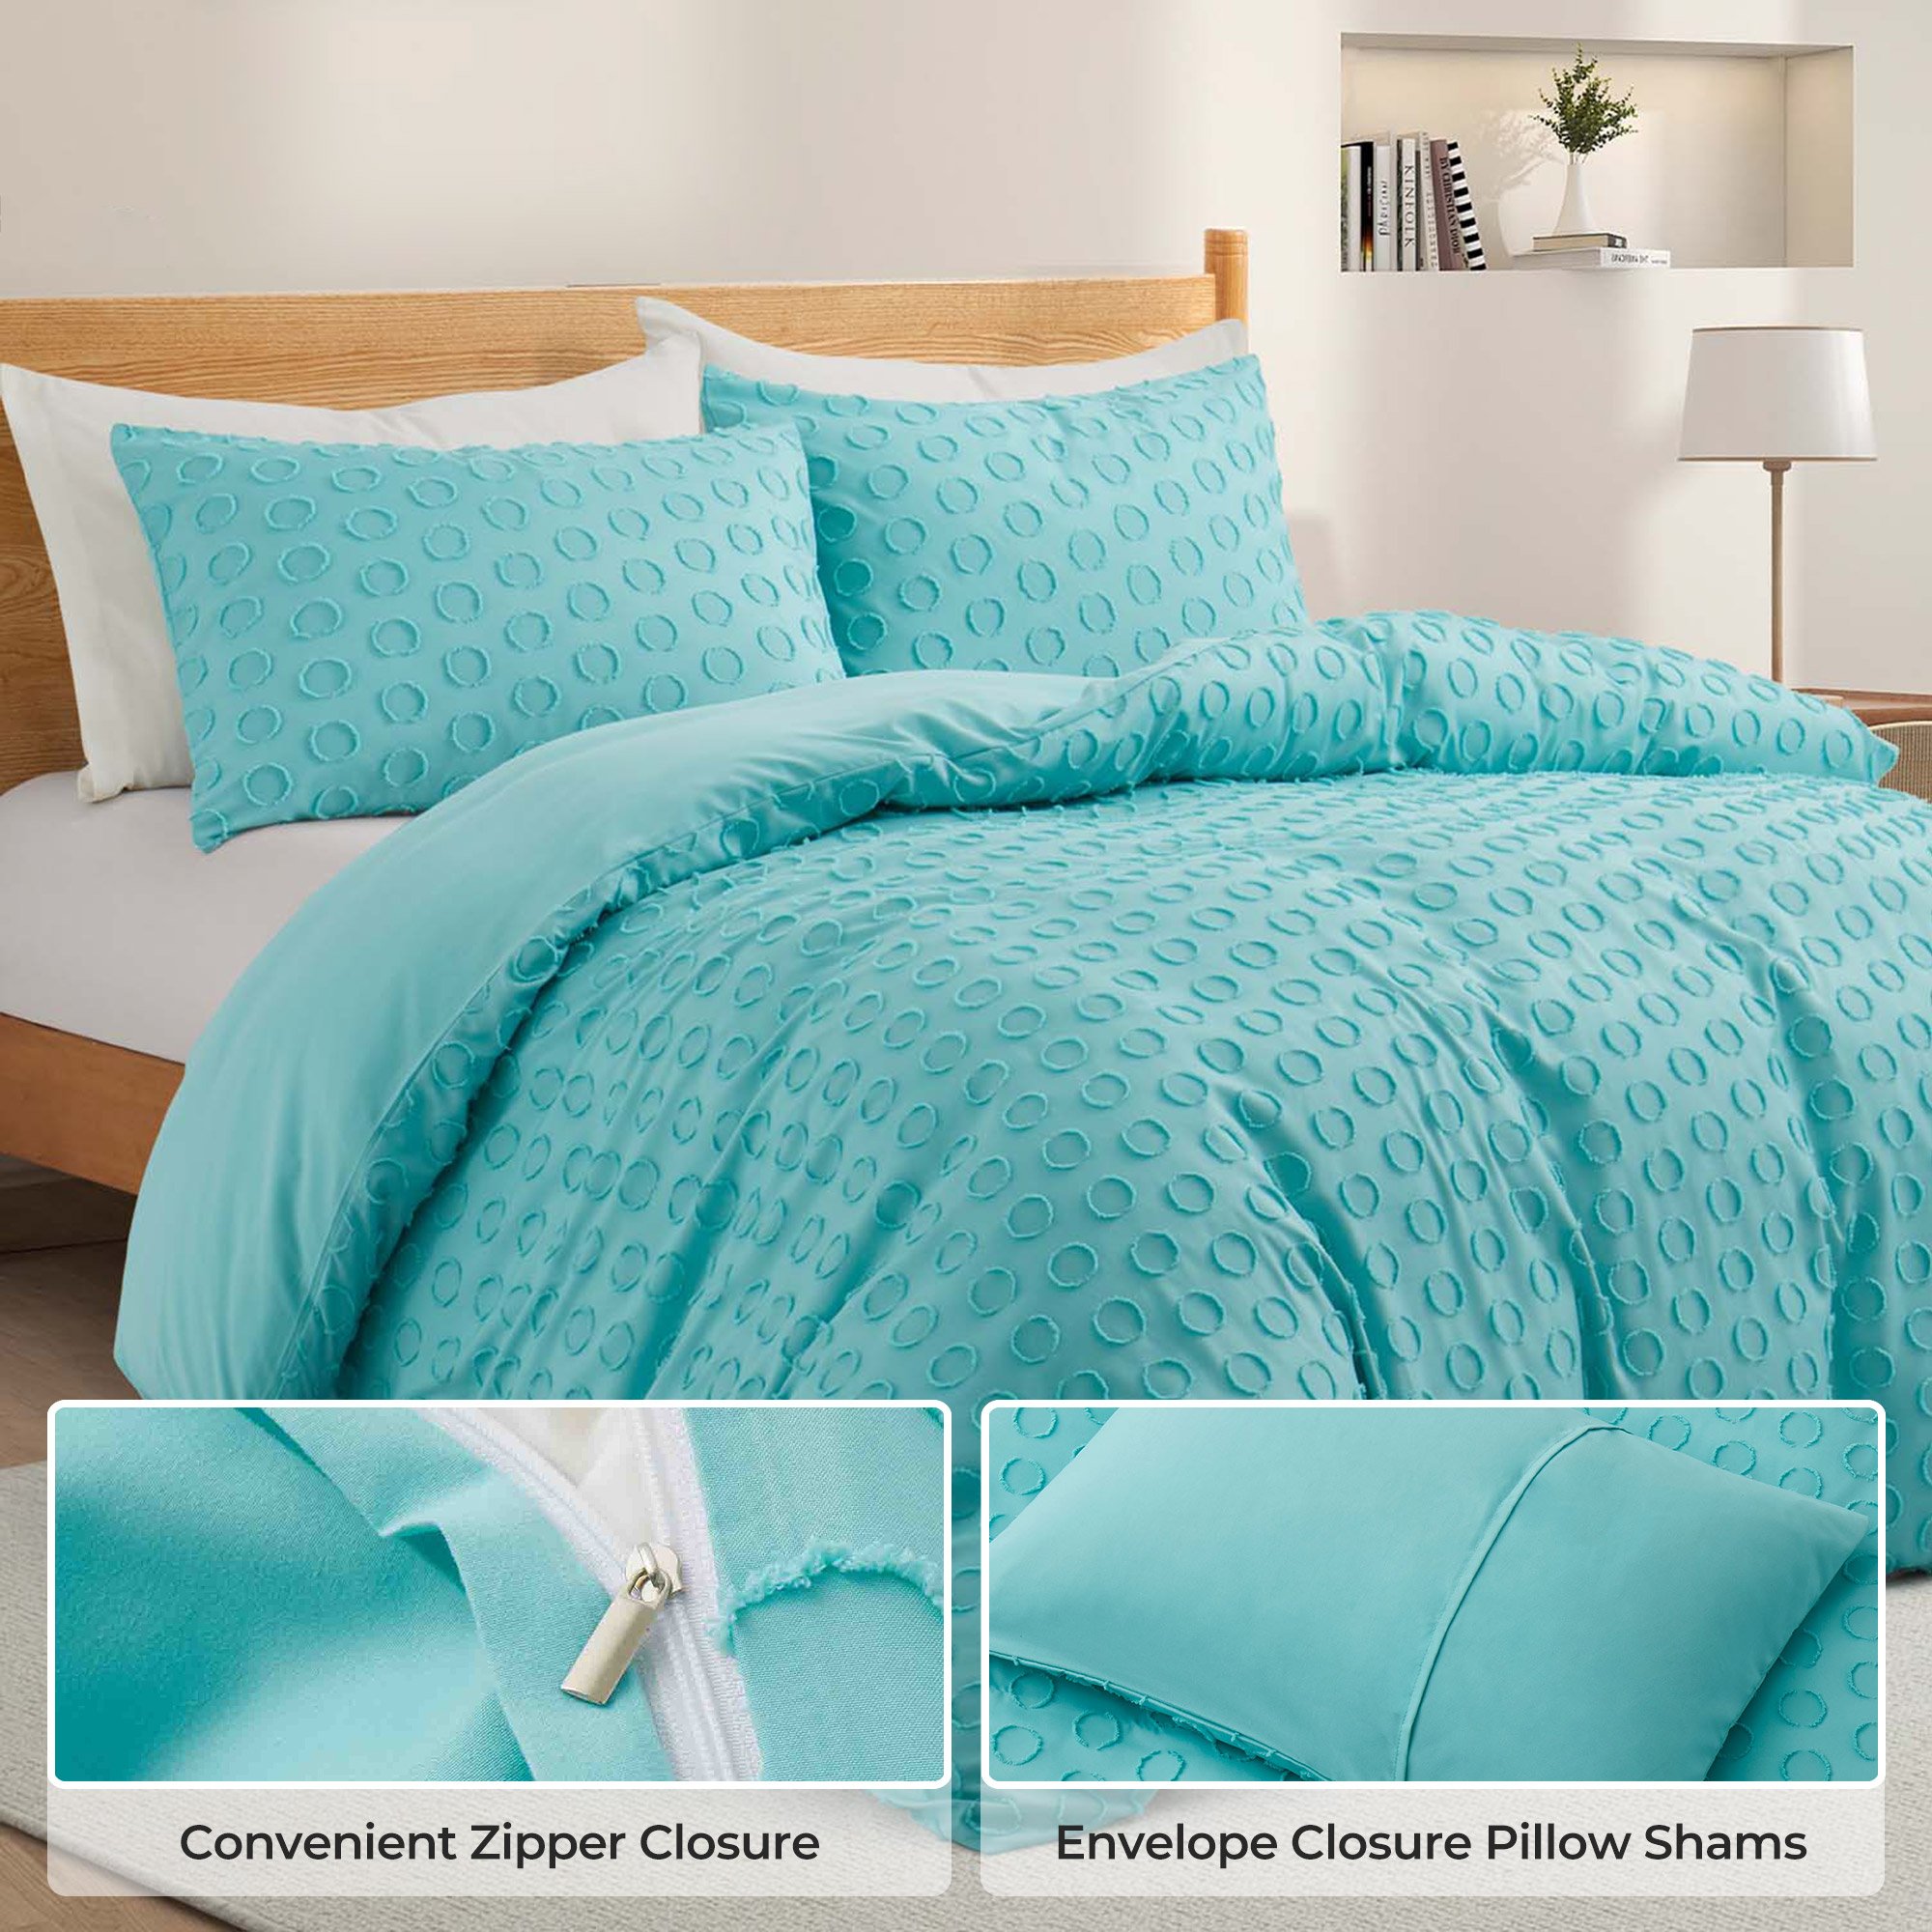 2 Or 3 Piece Duvet Cover Set With Shams - Full/Queen Size